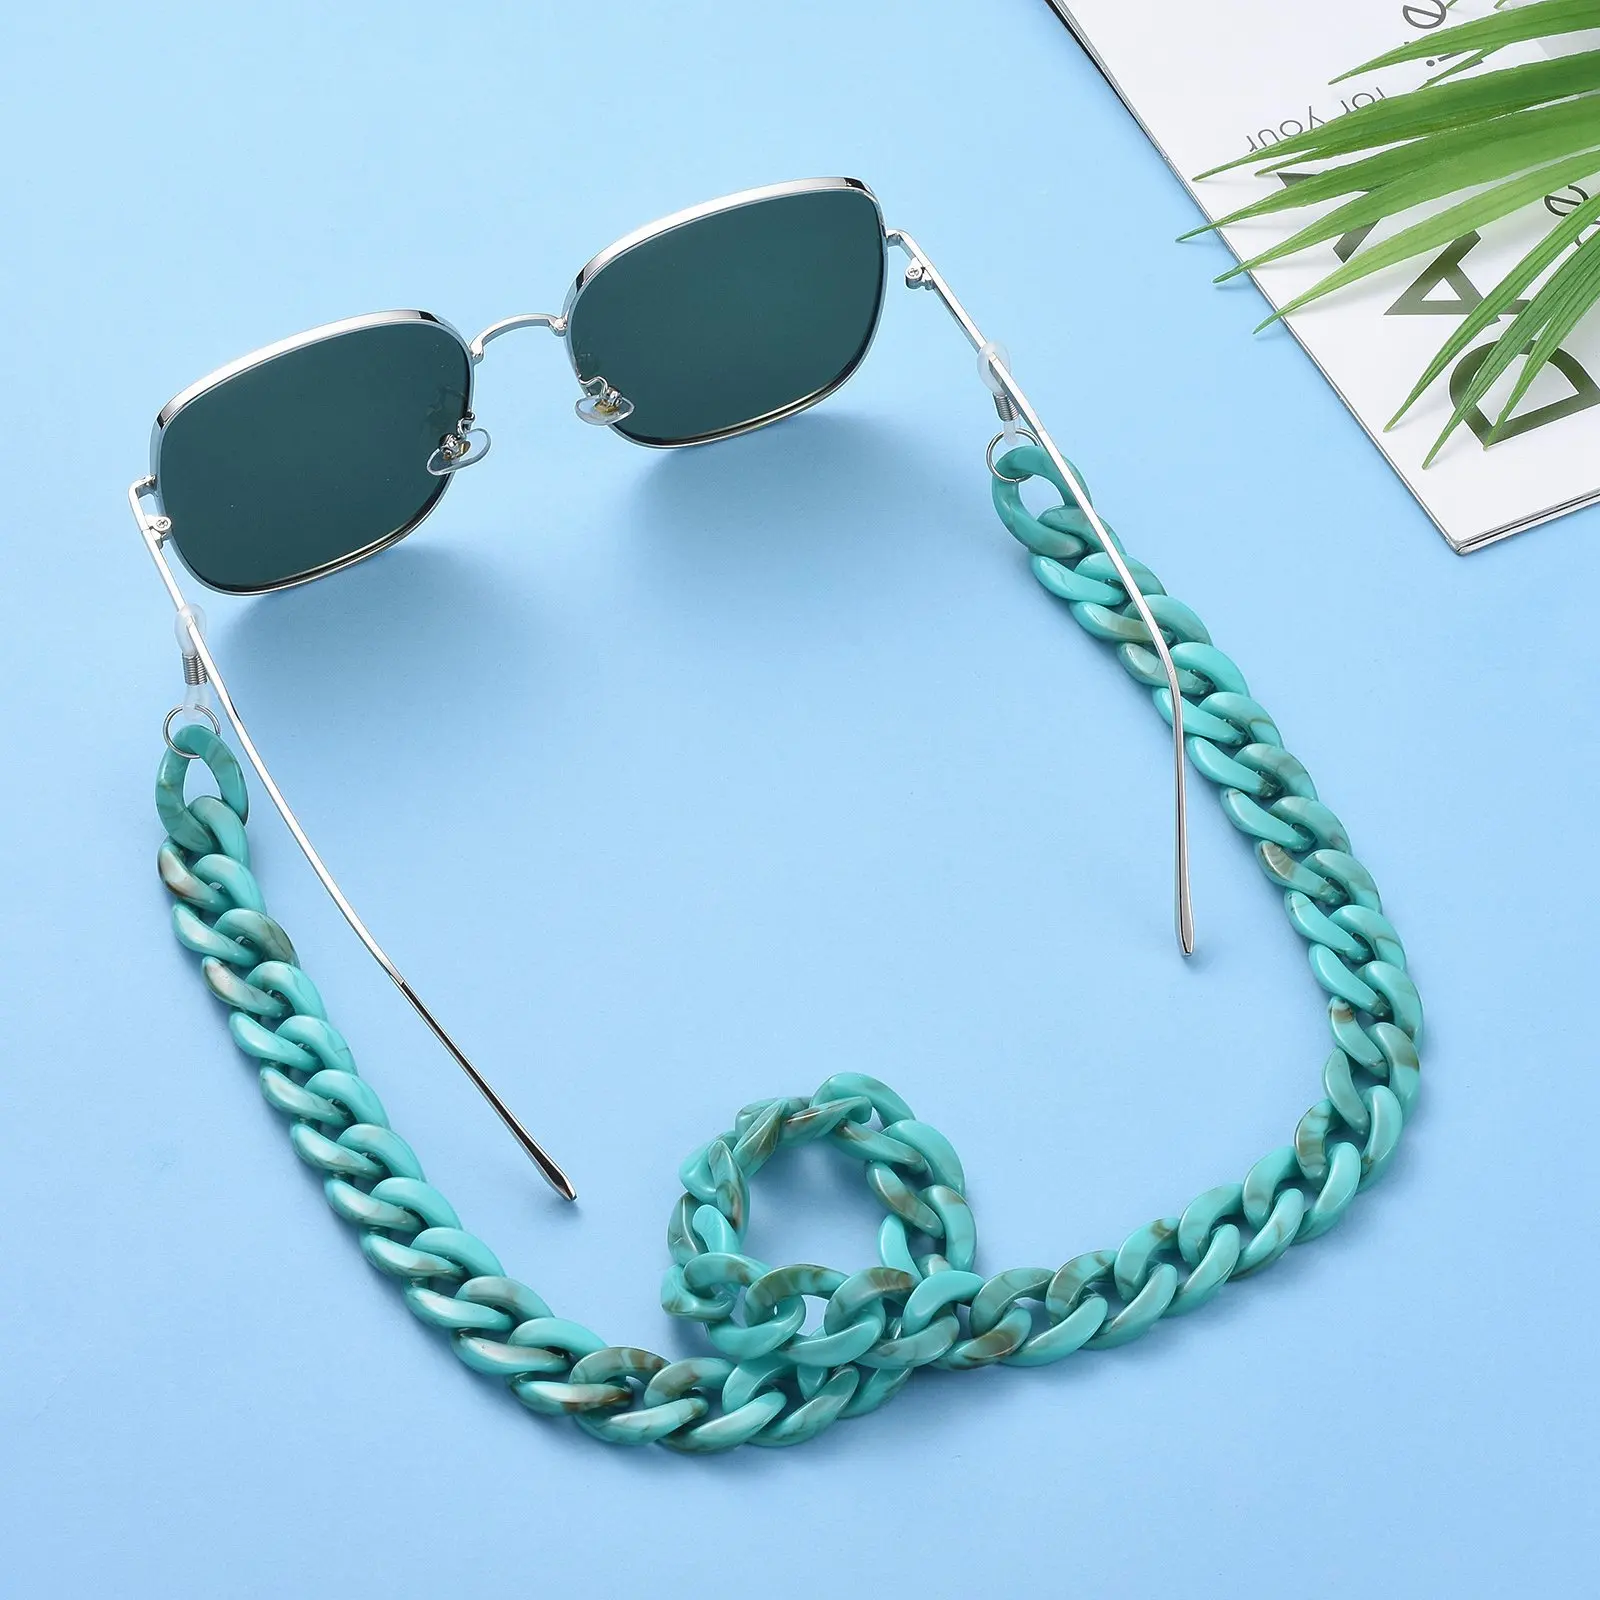 Meetee LCH-300 Acrylic Sunglasses Chain Anti-skid Eyeglass Plastic Neck Hanging Strap Cord Glasses Chains